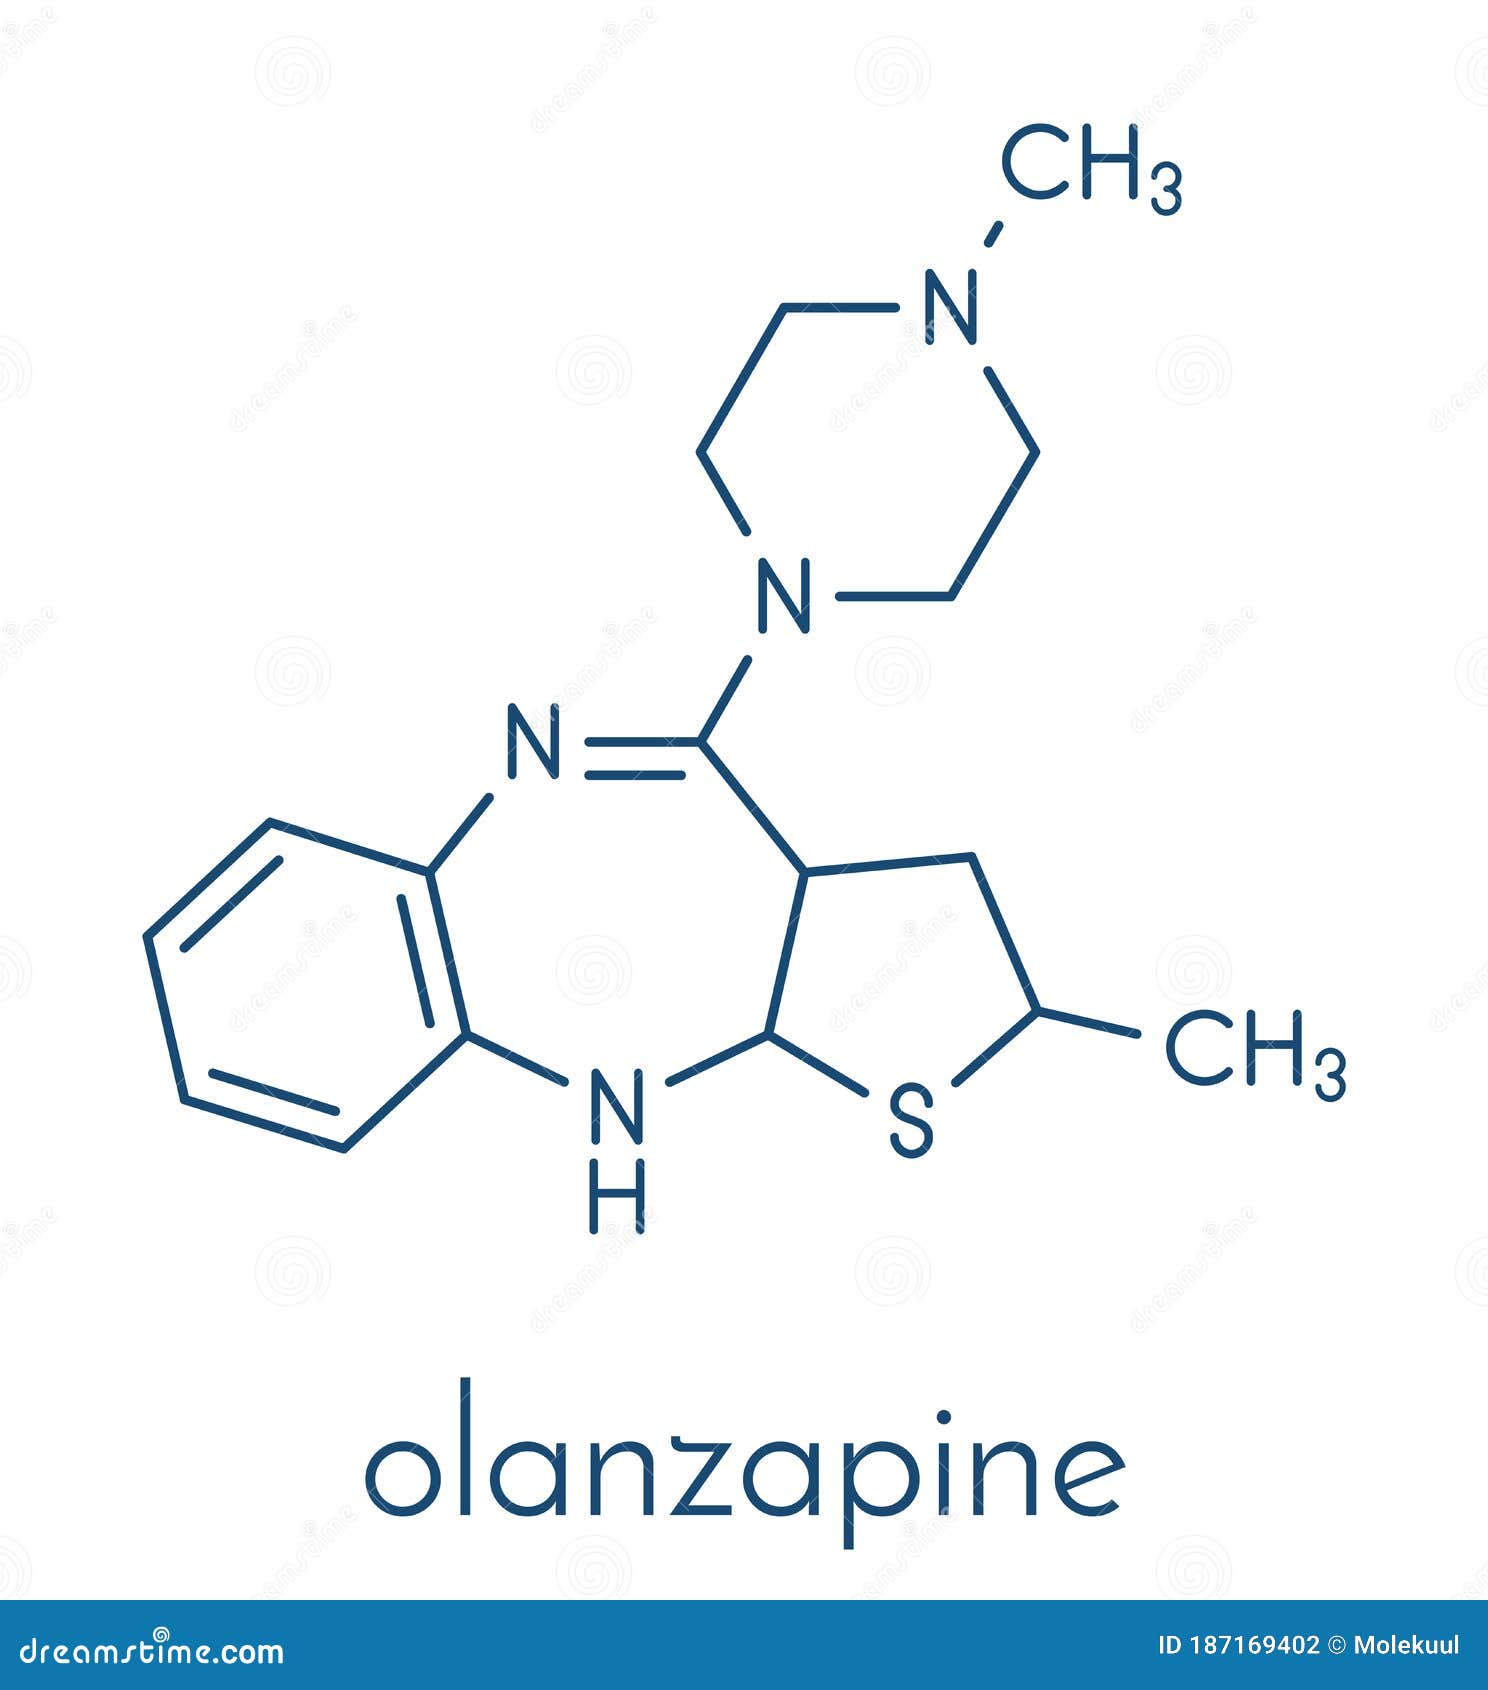 is olanzapine an antipsychotic